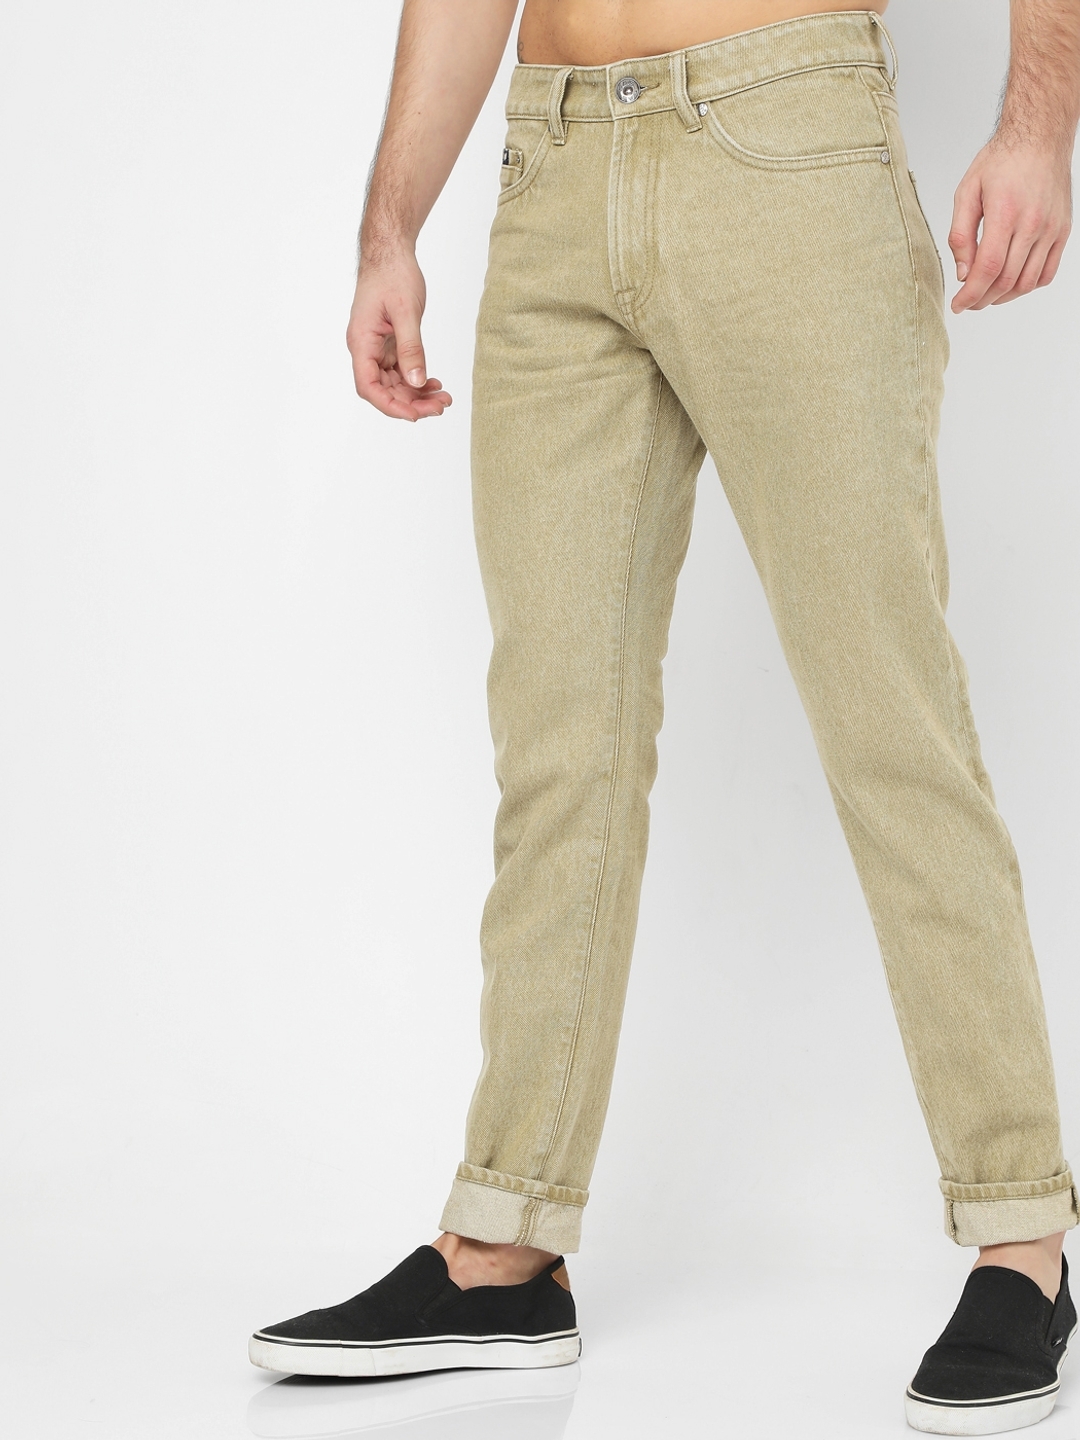 Buy CELIO Navy Mens Carrot Fit Solid Pants | Shoppers Stop